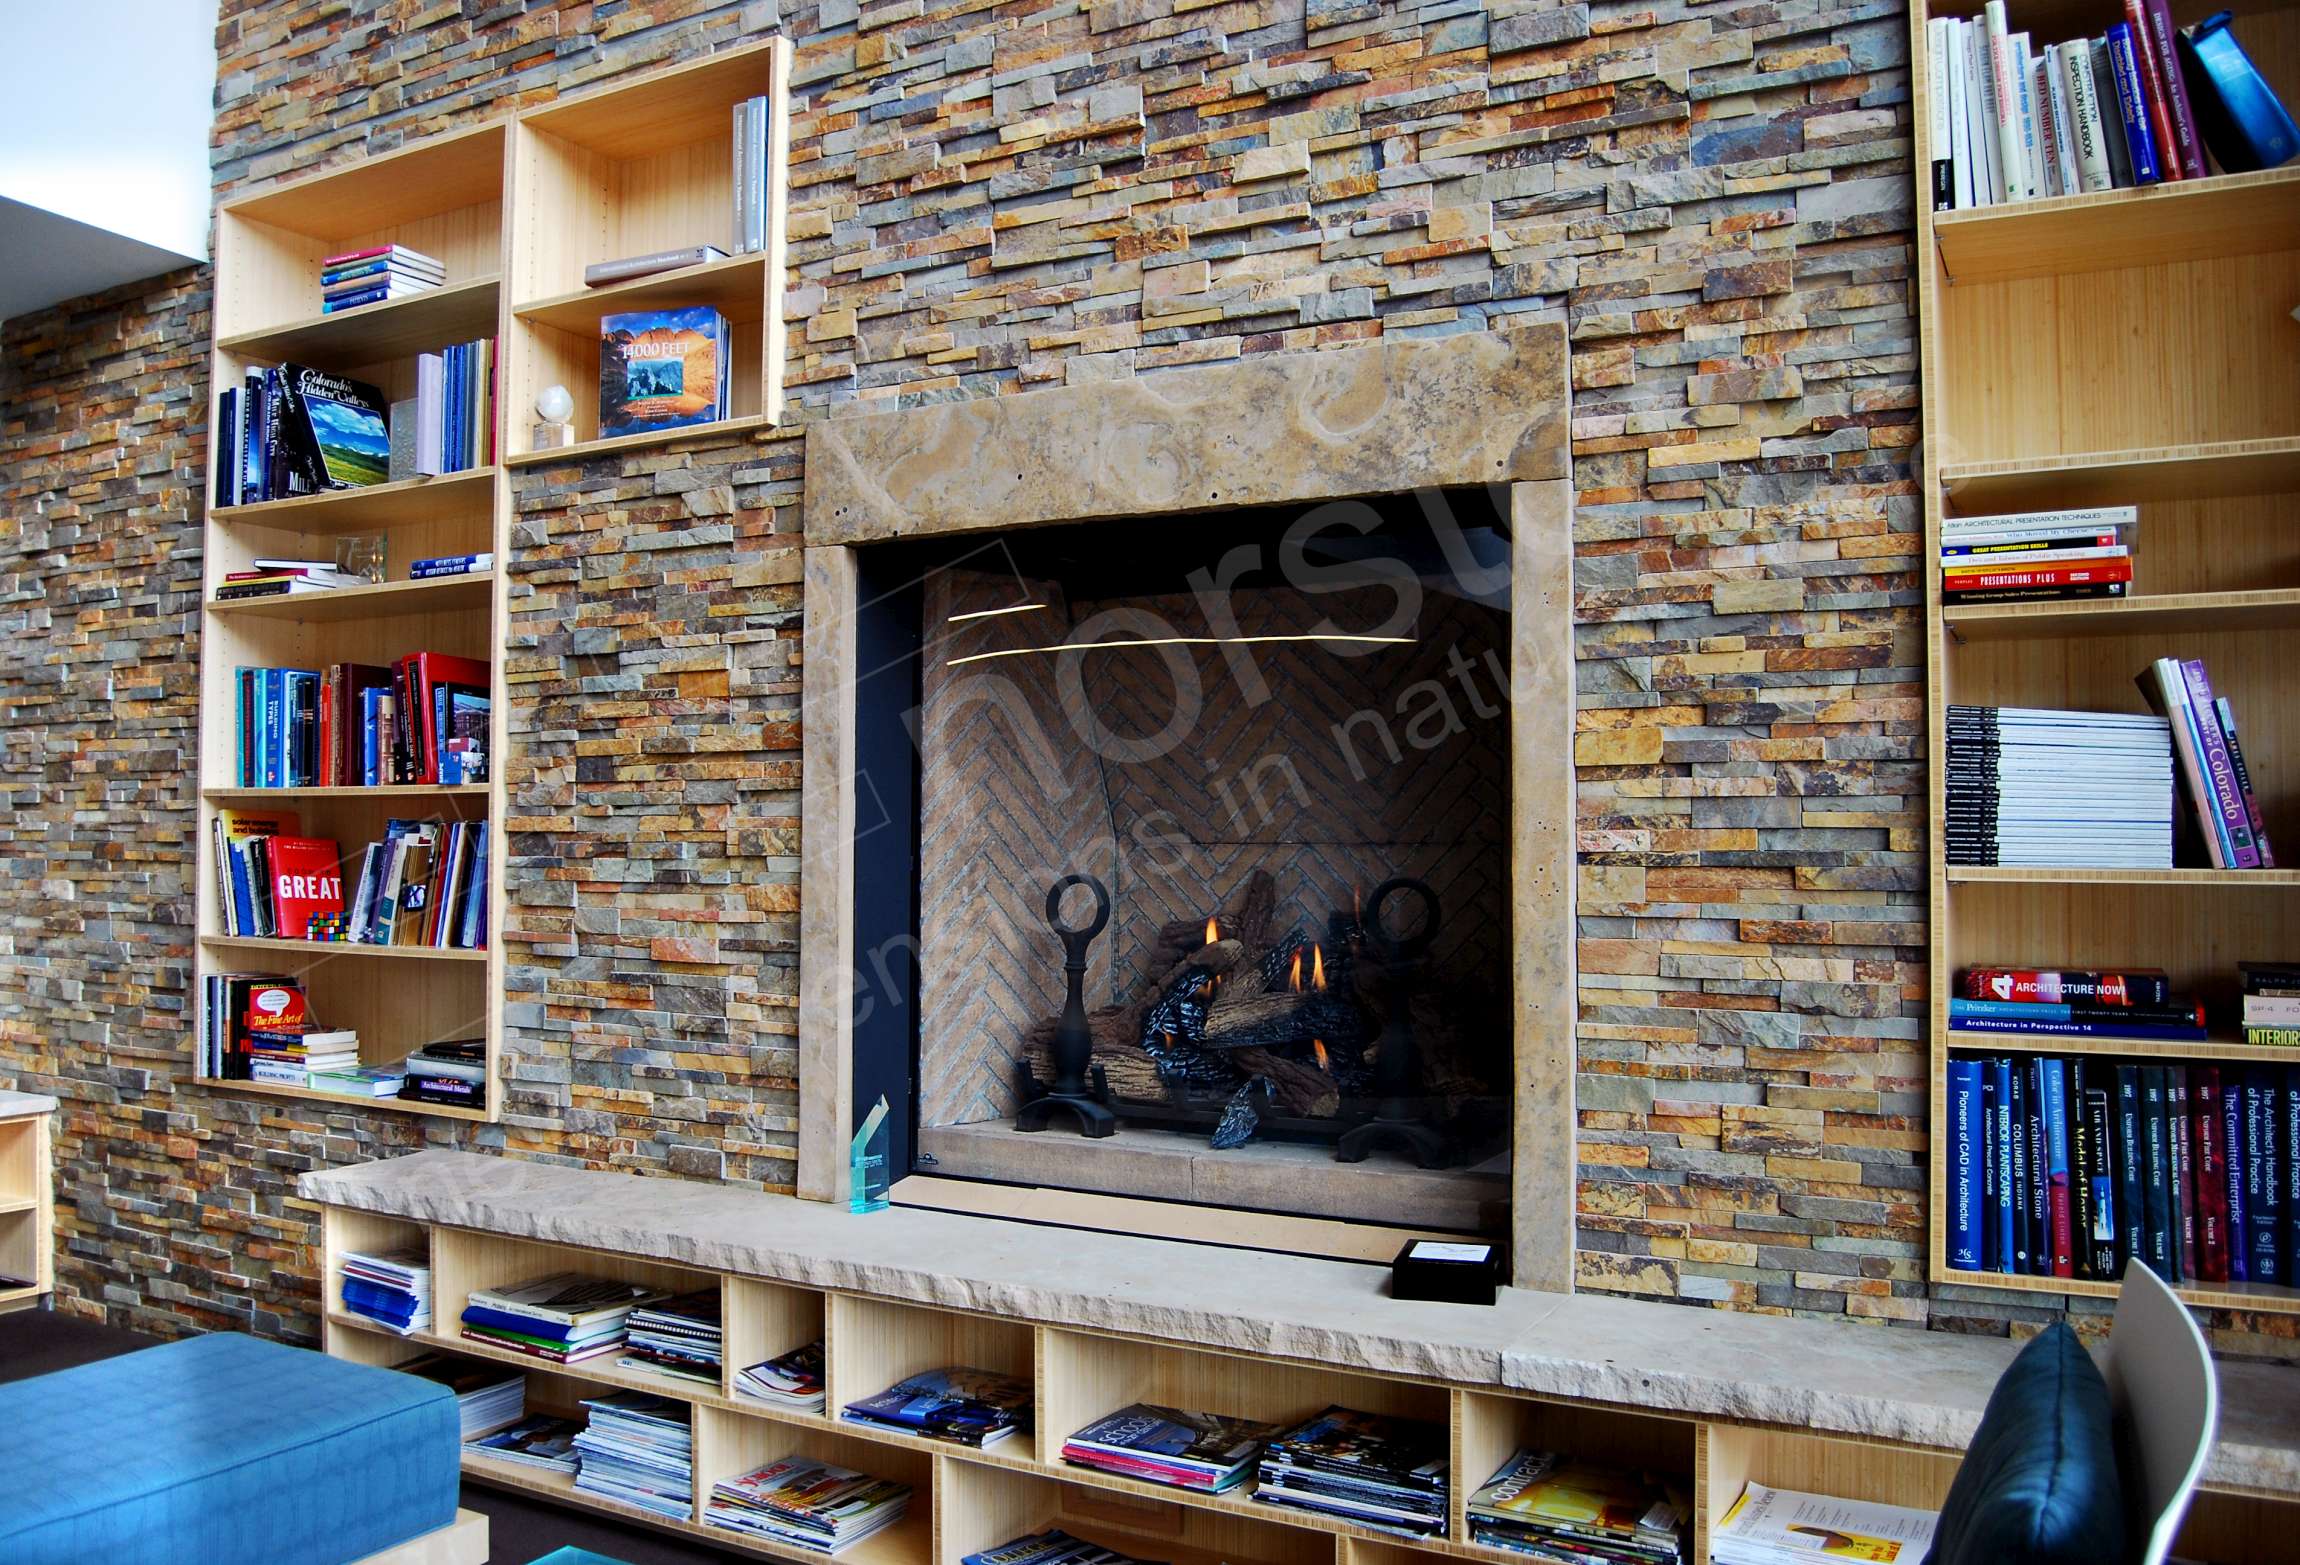 Natural Stone Veneer Fireplace with raised cut stone hearth with storage cubbies underneath it.